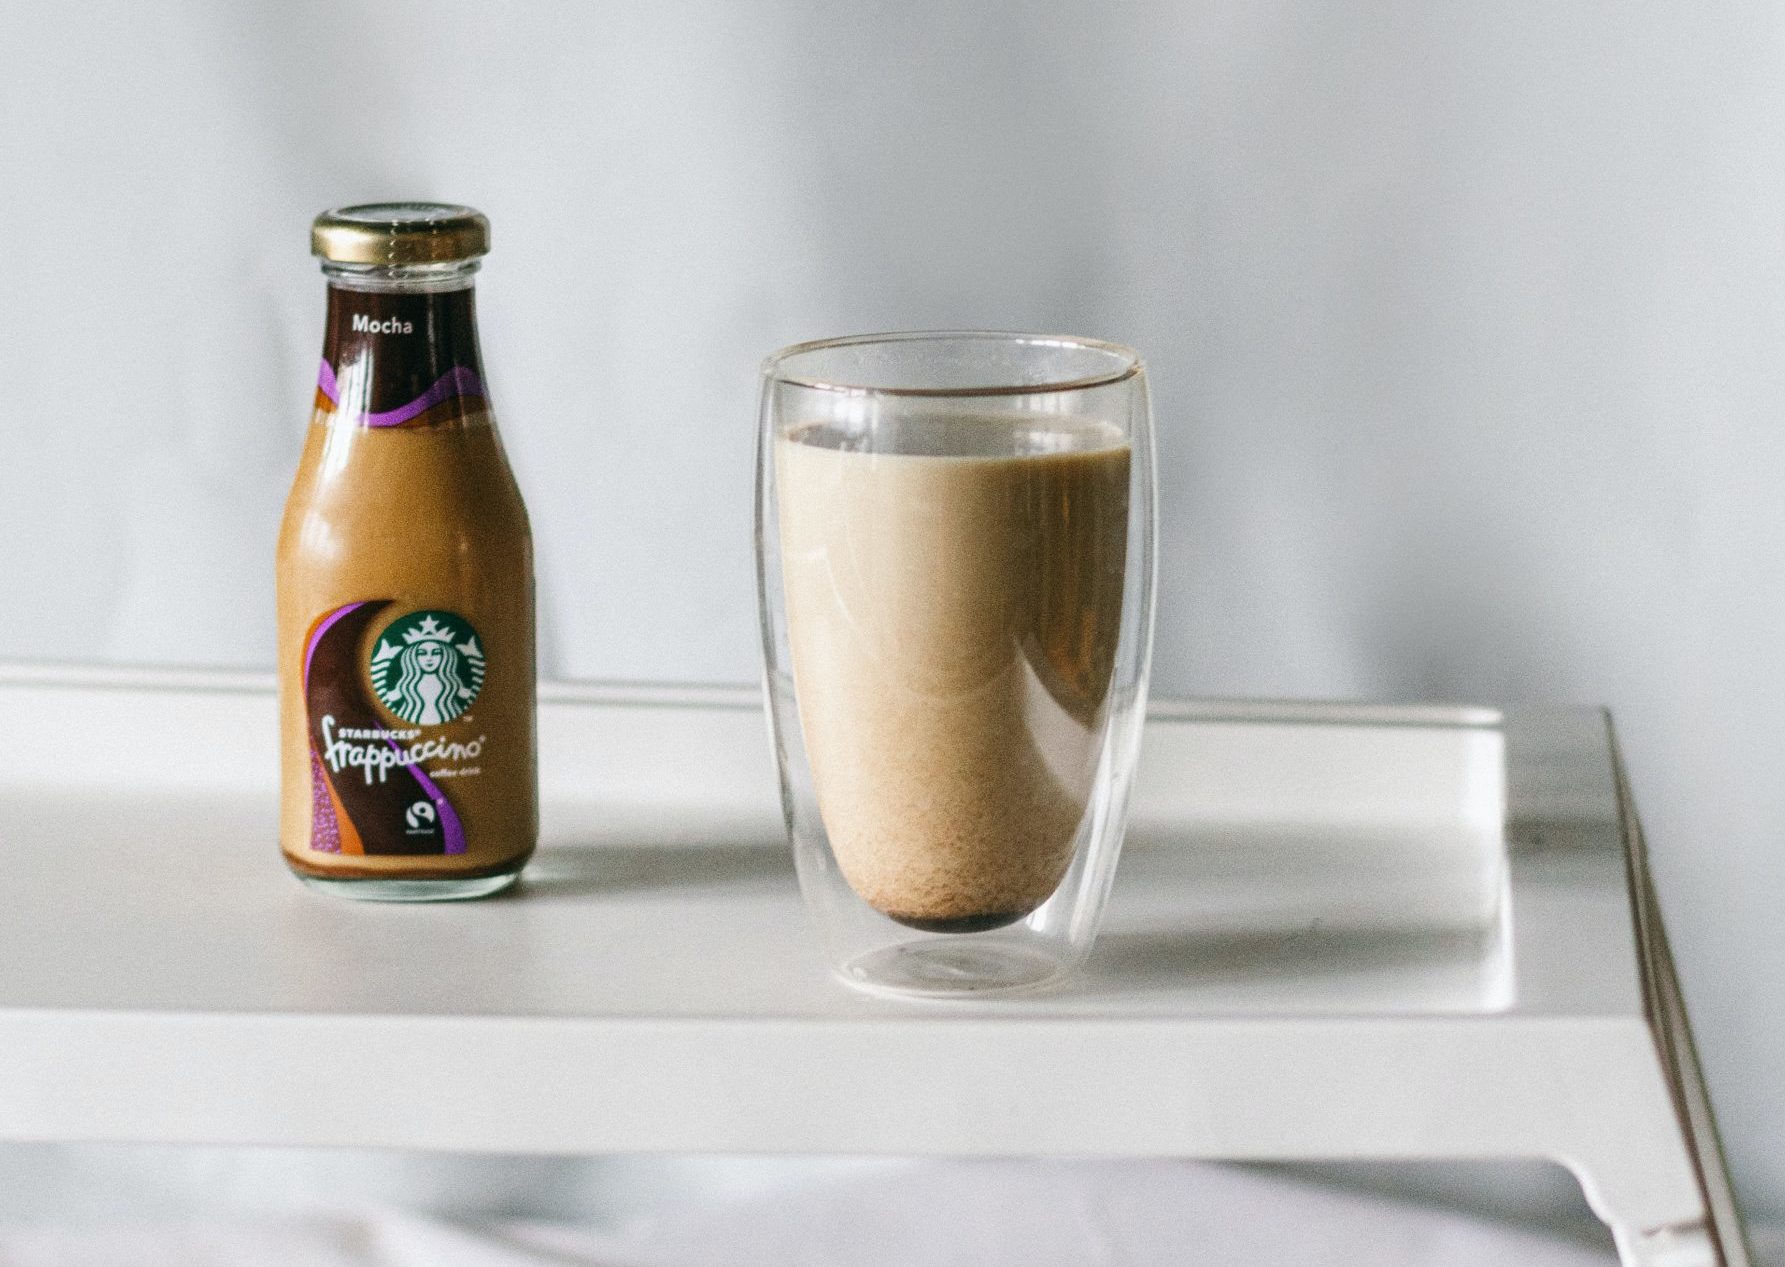 Dairy Free Starbucks Guide: Complete with Beverages, Food & Vegan Info